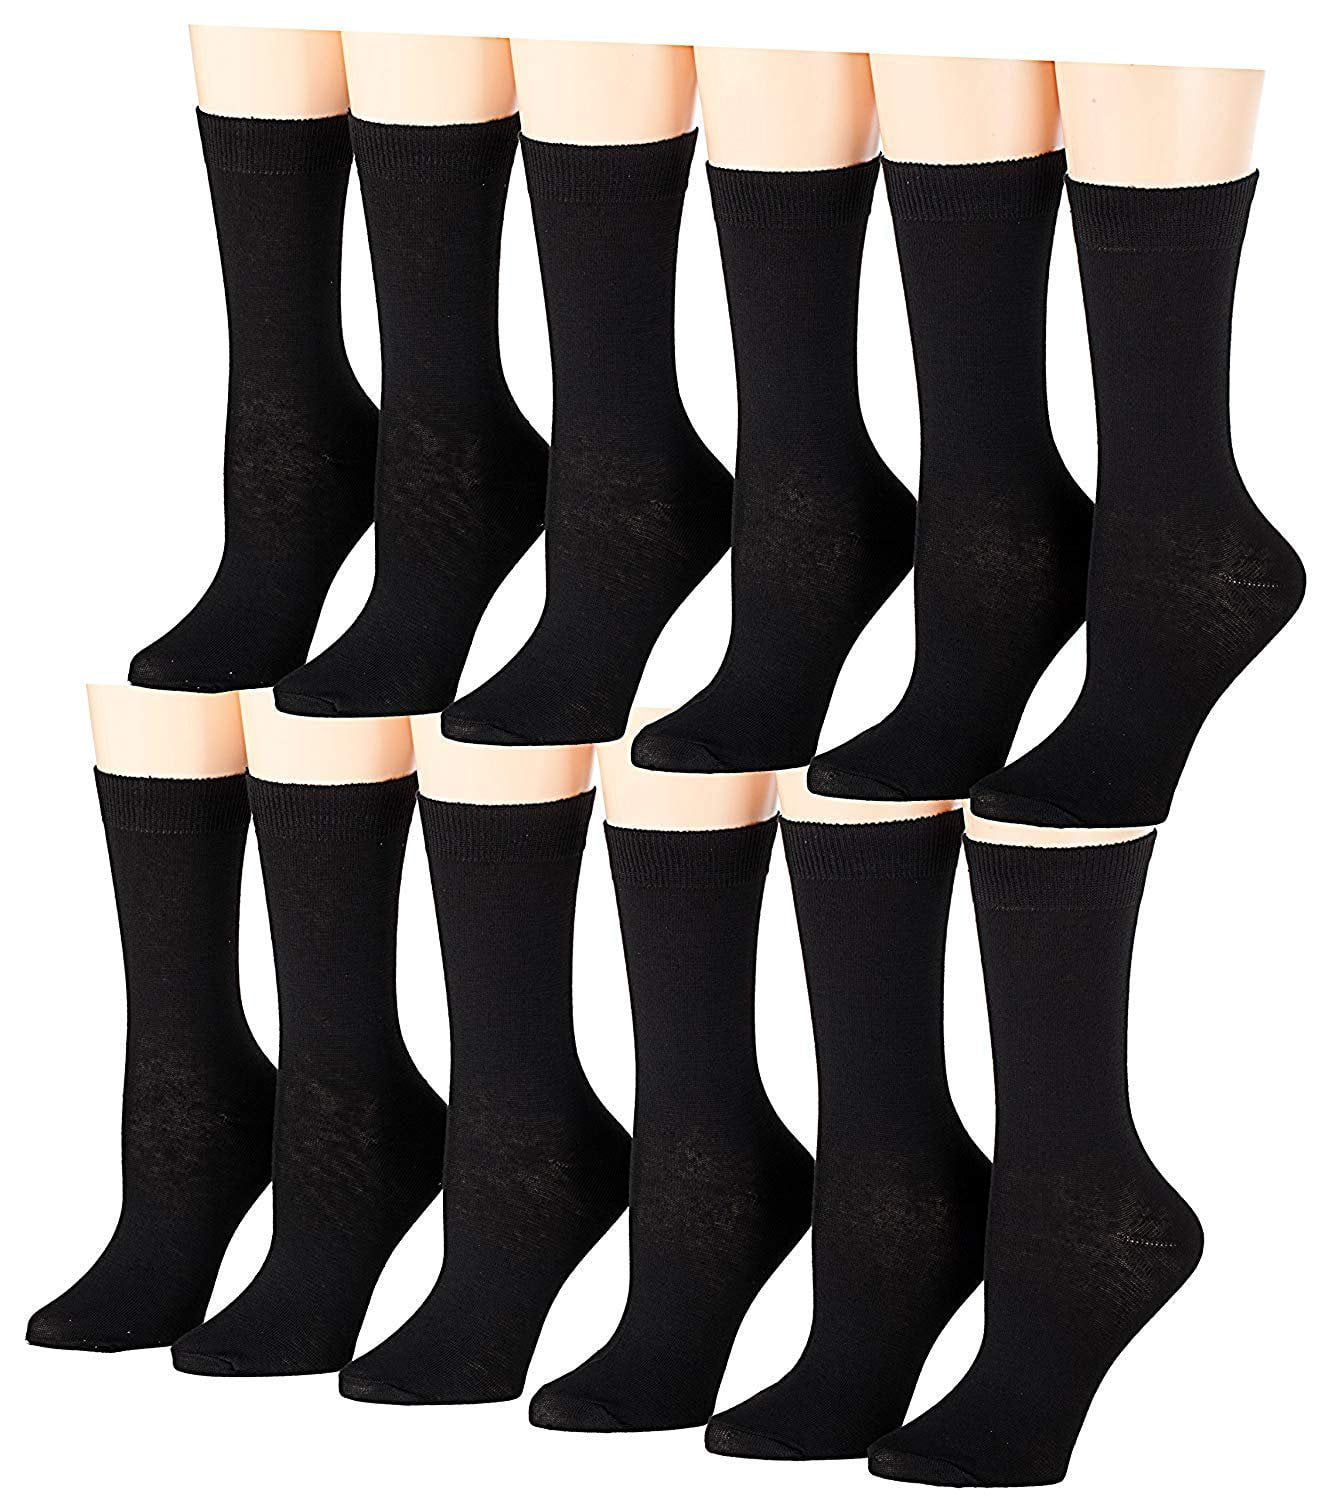 Womens 5-12 Over the Calf Gallery Fashion Womens Socks One Size Fits Most